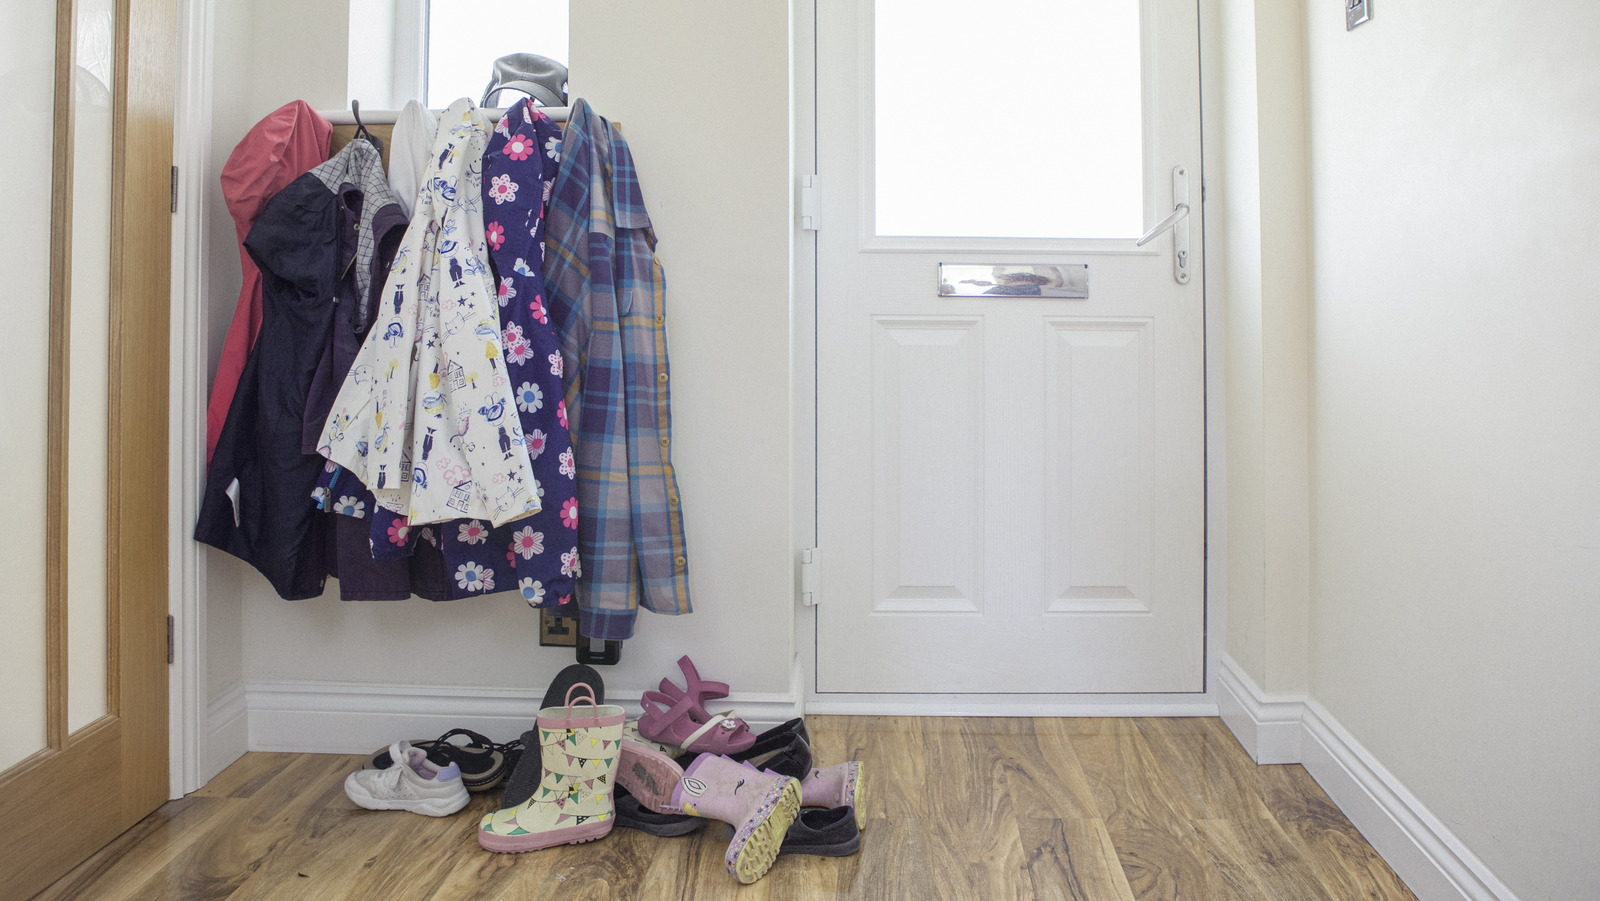 https://www.housedigest.com/img/gallery/eliminate-the-dreaded-mudroom-mess-with-this-stylish-diy-boot-tray/l-intro-1690997257.jpg